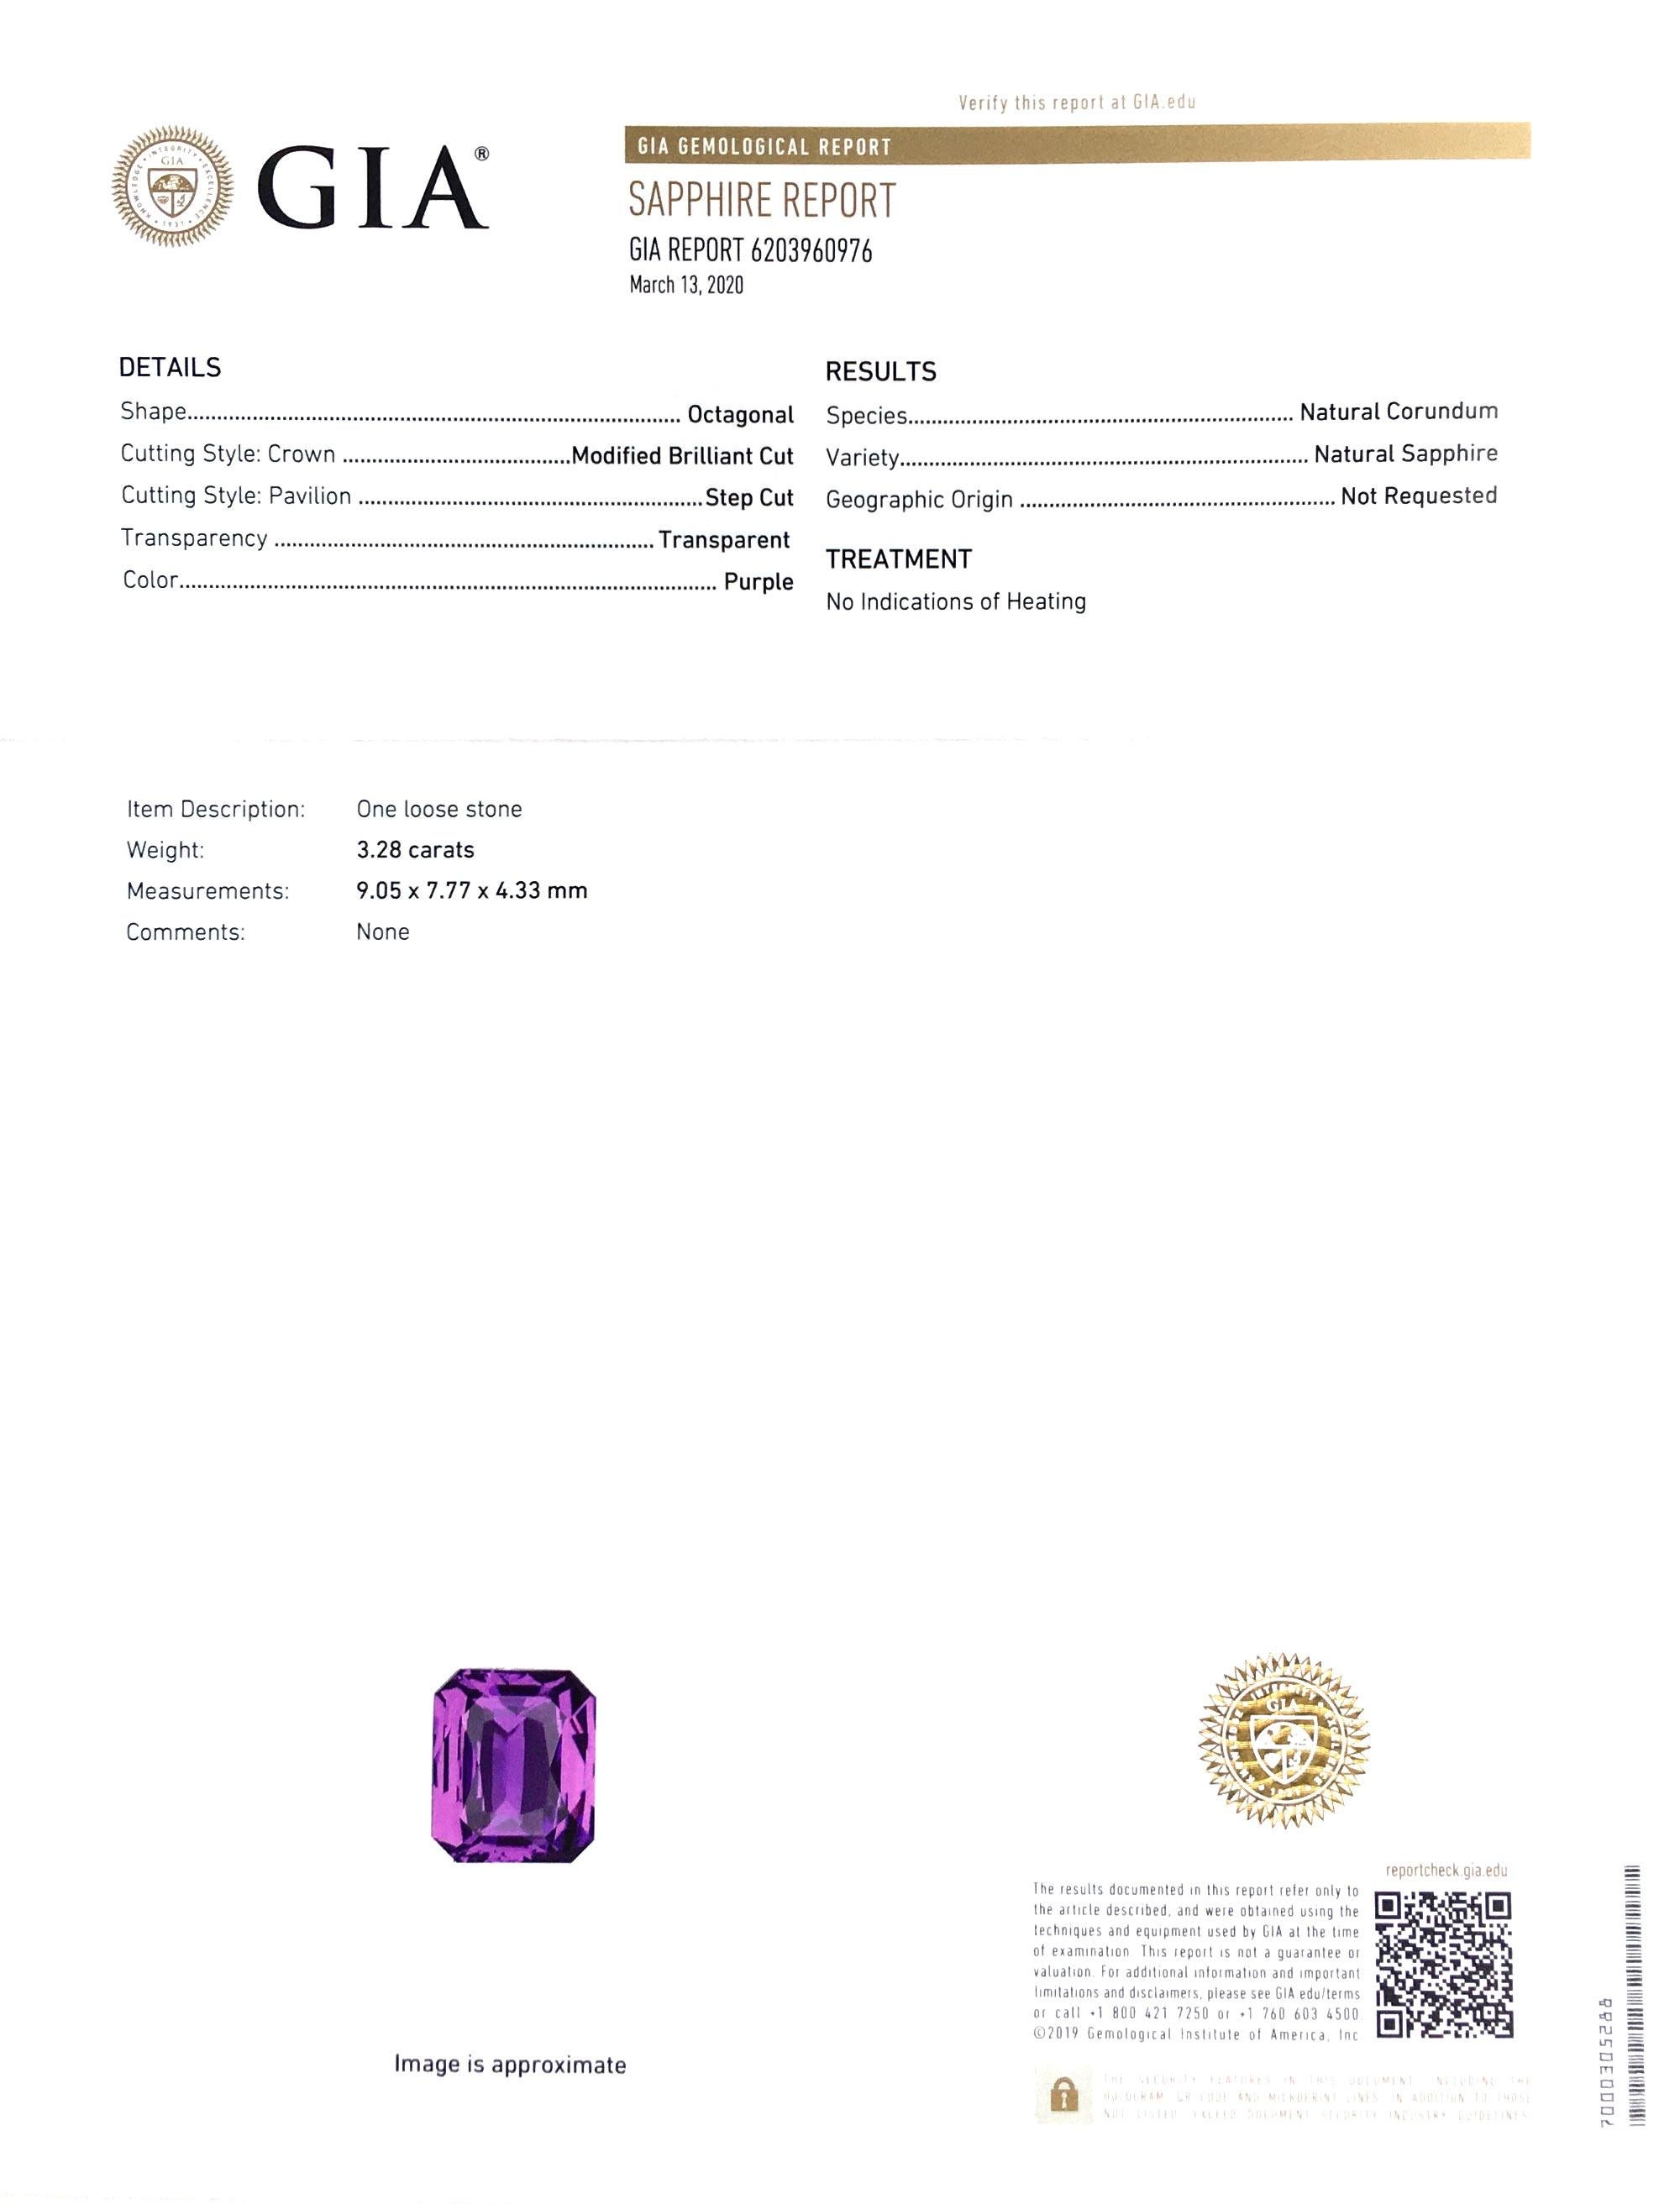 An unheated beauty, this 3.28 carat Purple Sapphire will sweep her off her feet. Its luxurious, velvety colors paired with an unmatched luminosity offer the gemstone an ethereal appearance. A durable choice, it will make a stunning engagement ring